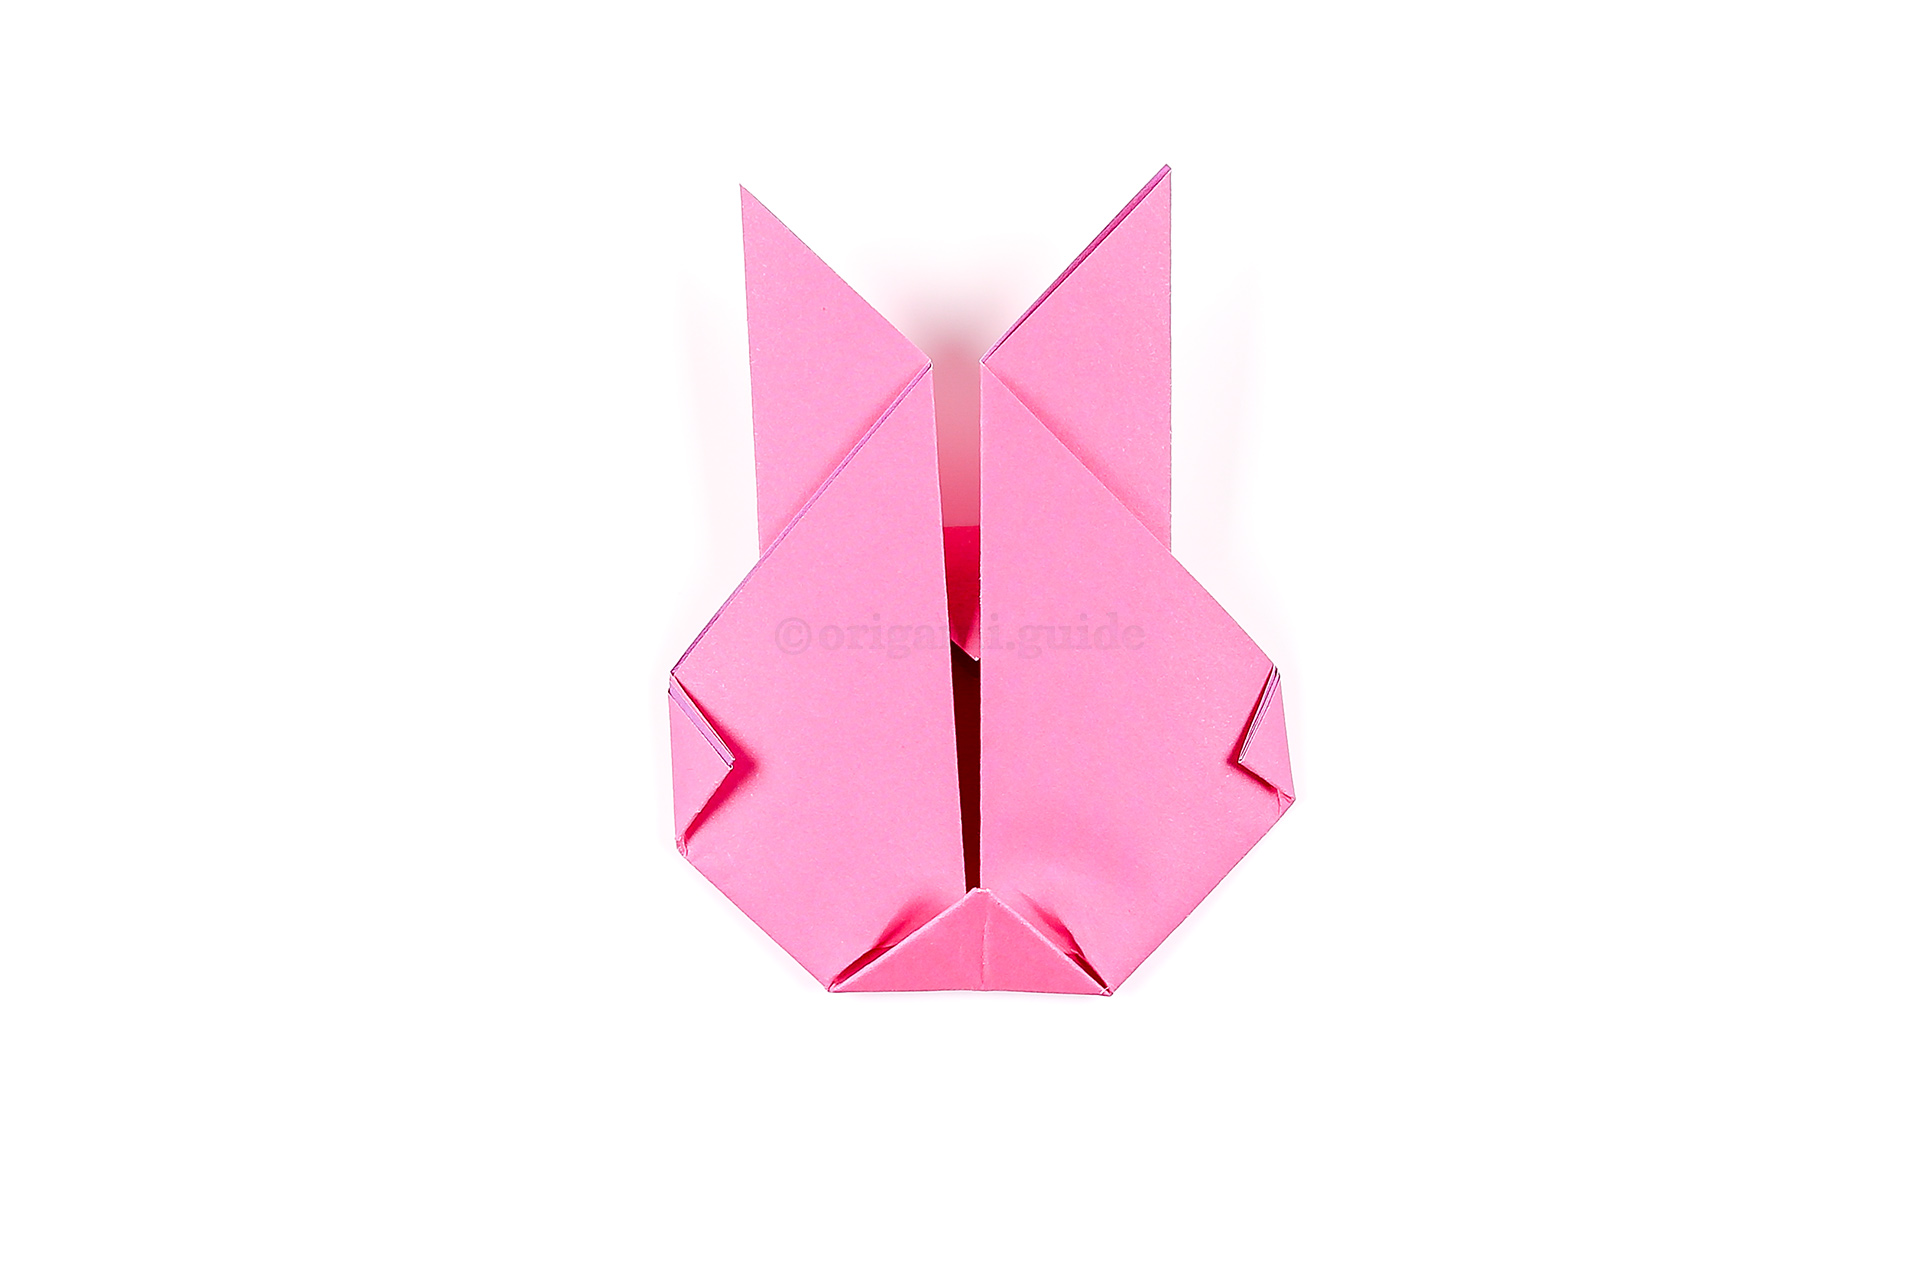 This is the back of the origami bunny rabbit face.